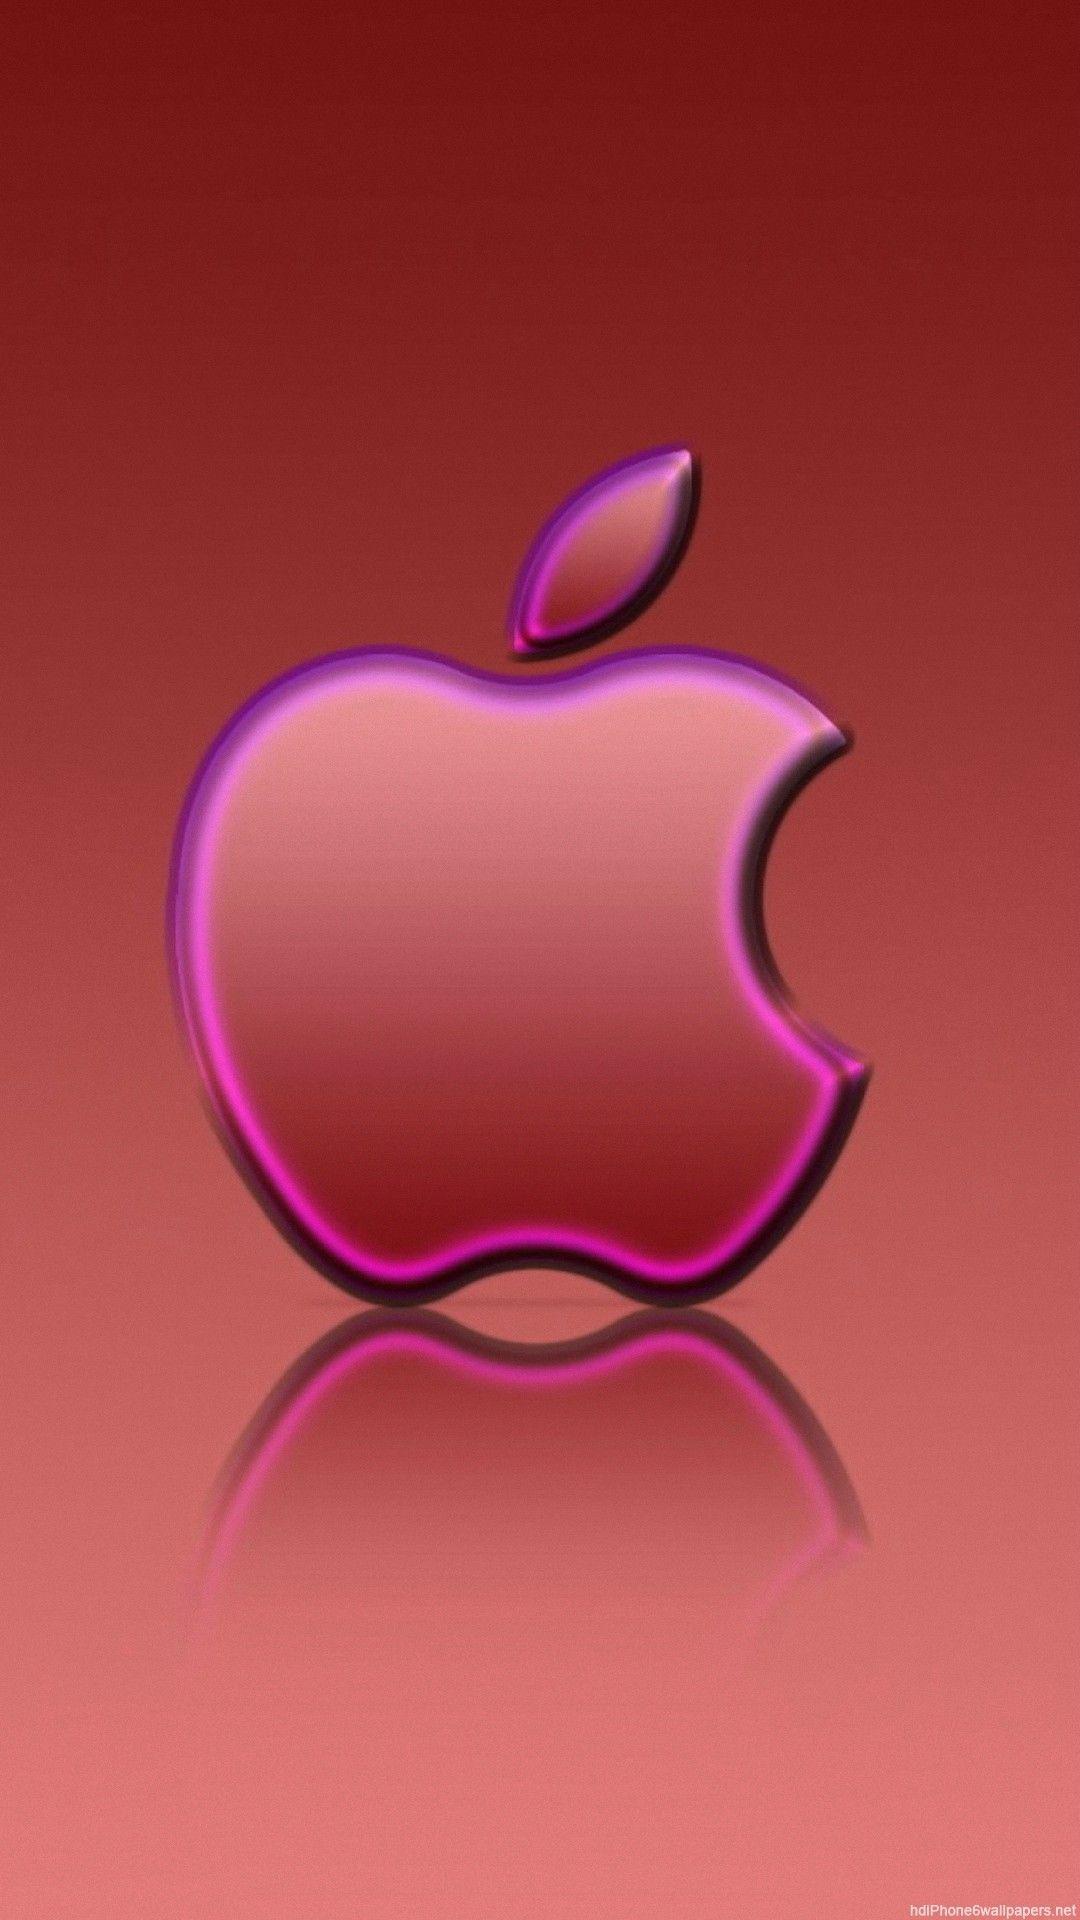 1080 x 1920 · jpeg - Apple Logo Wallpapers HD 1080p For Iphone - Wallpaper Cave